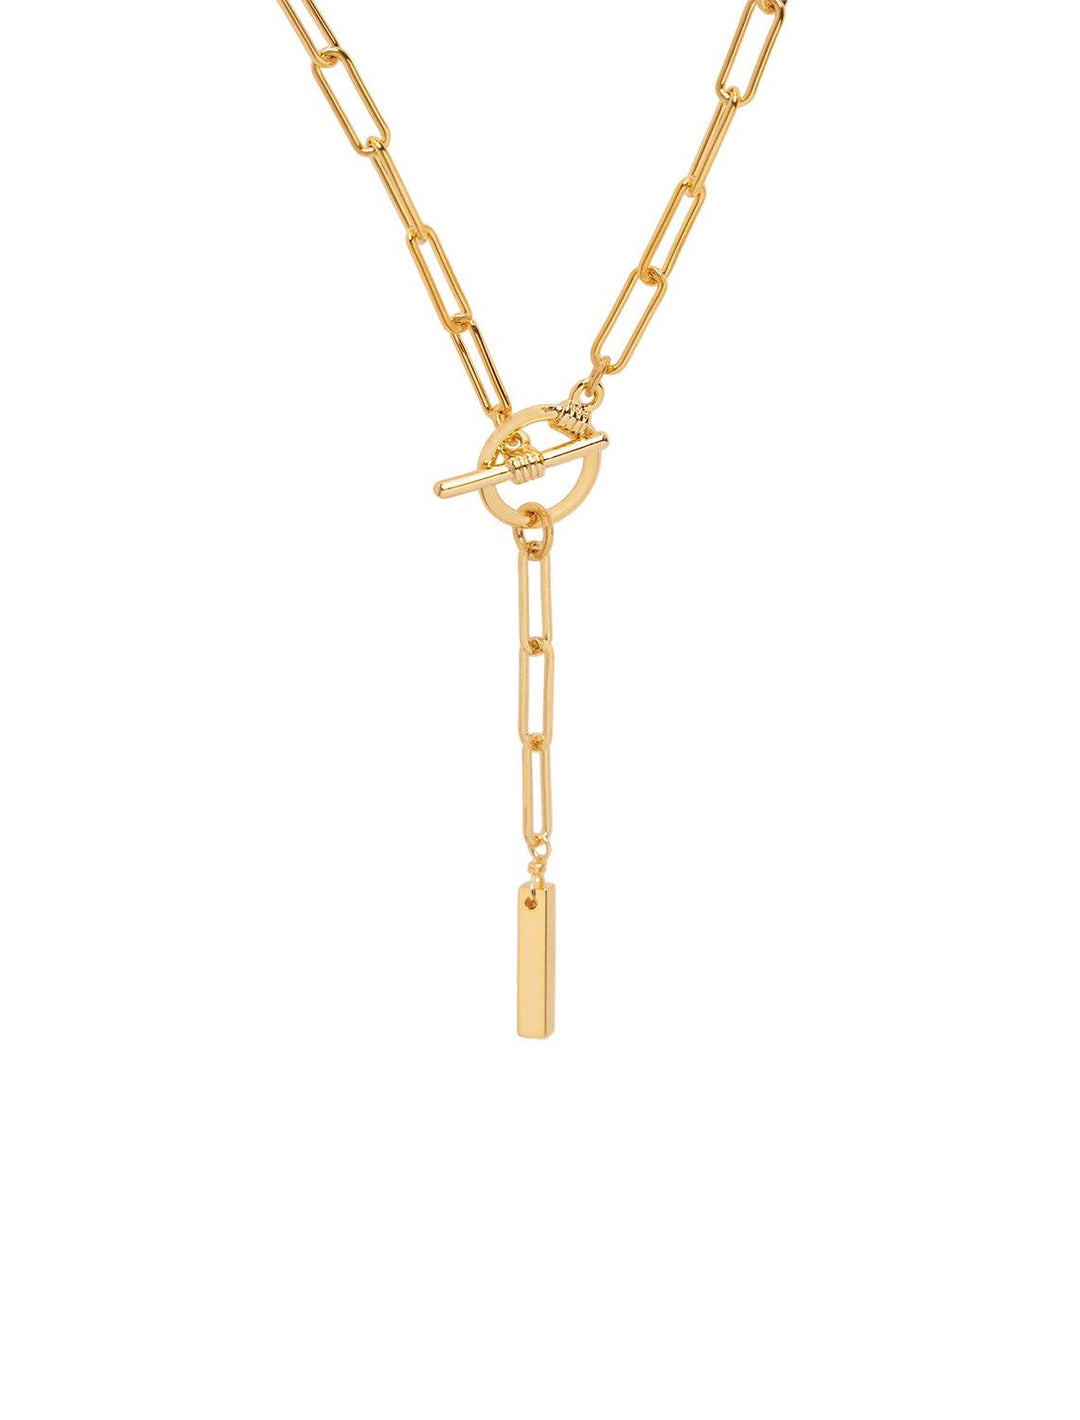 AV Max parker toggle necklace in gold - Twigs